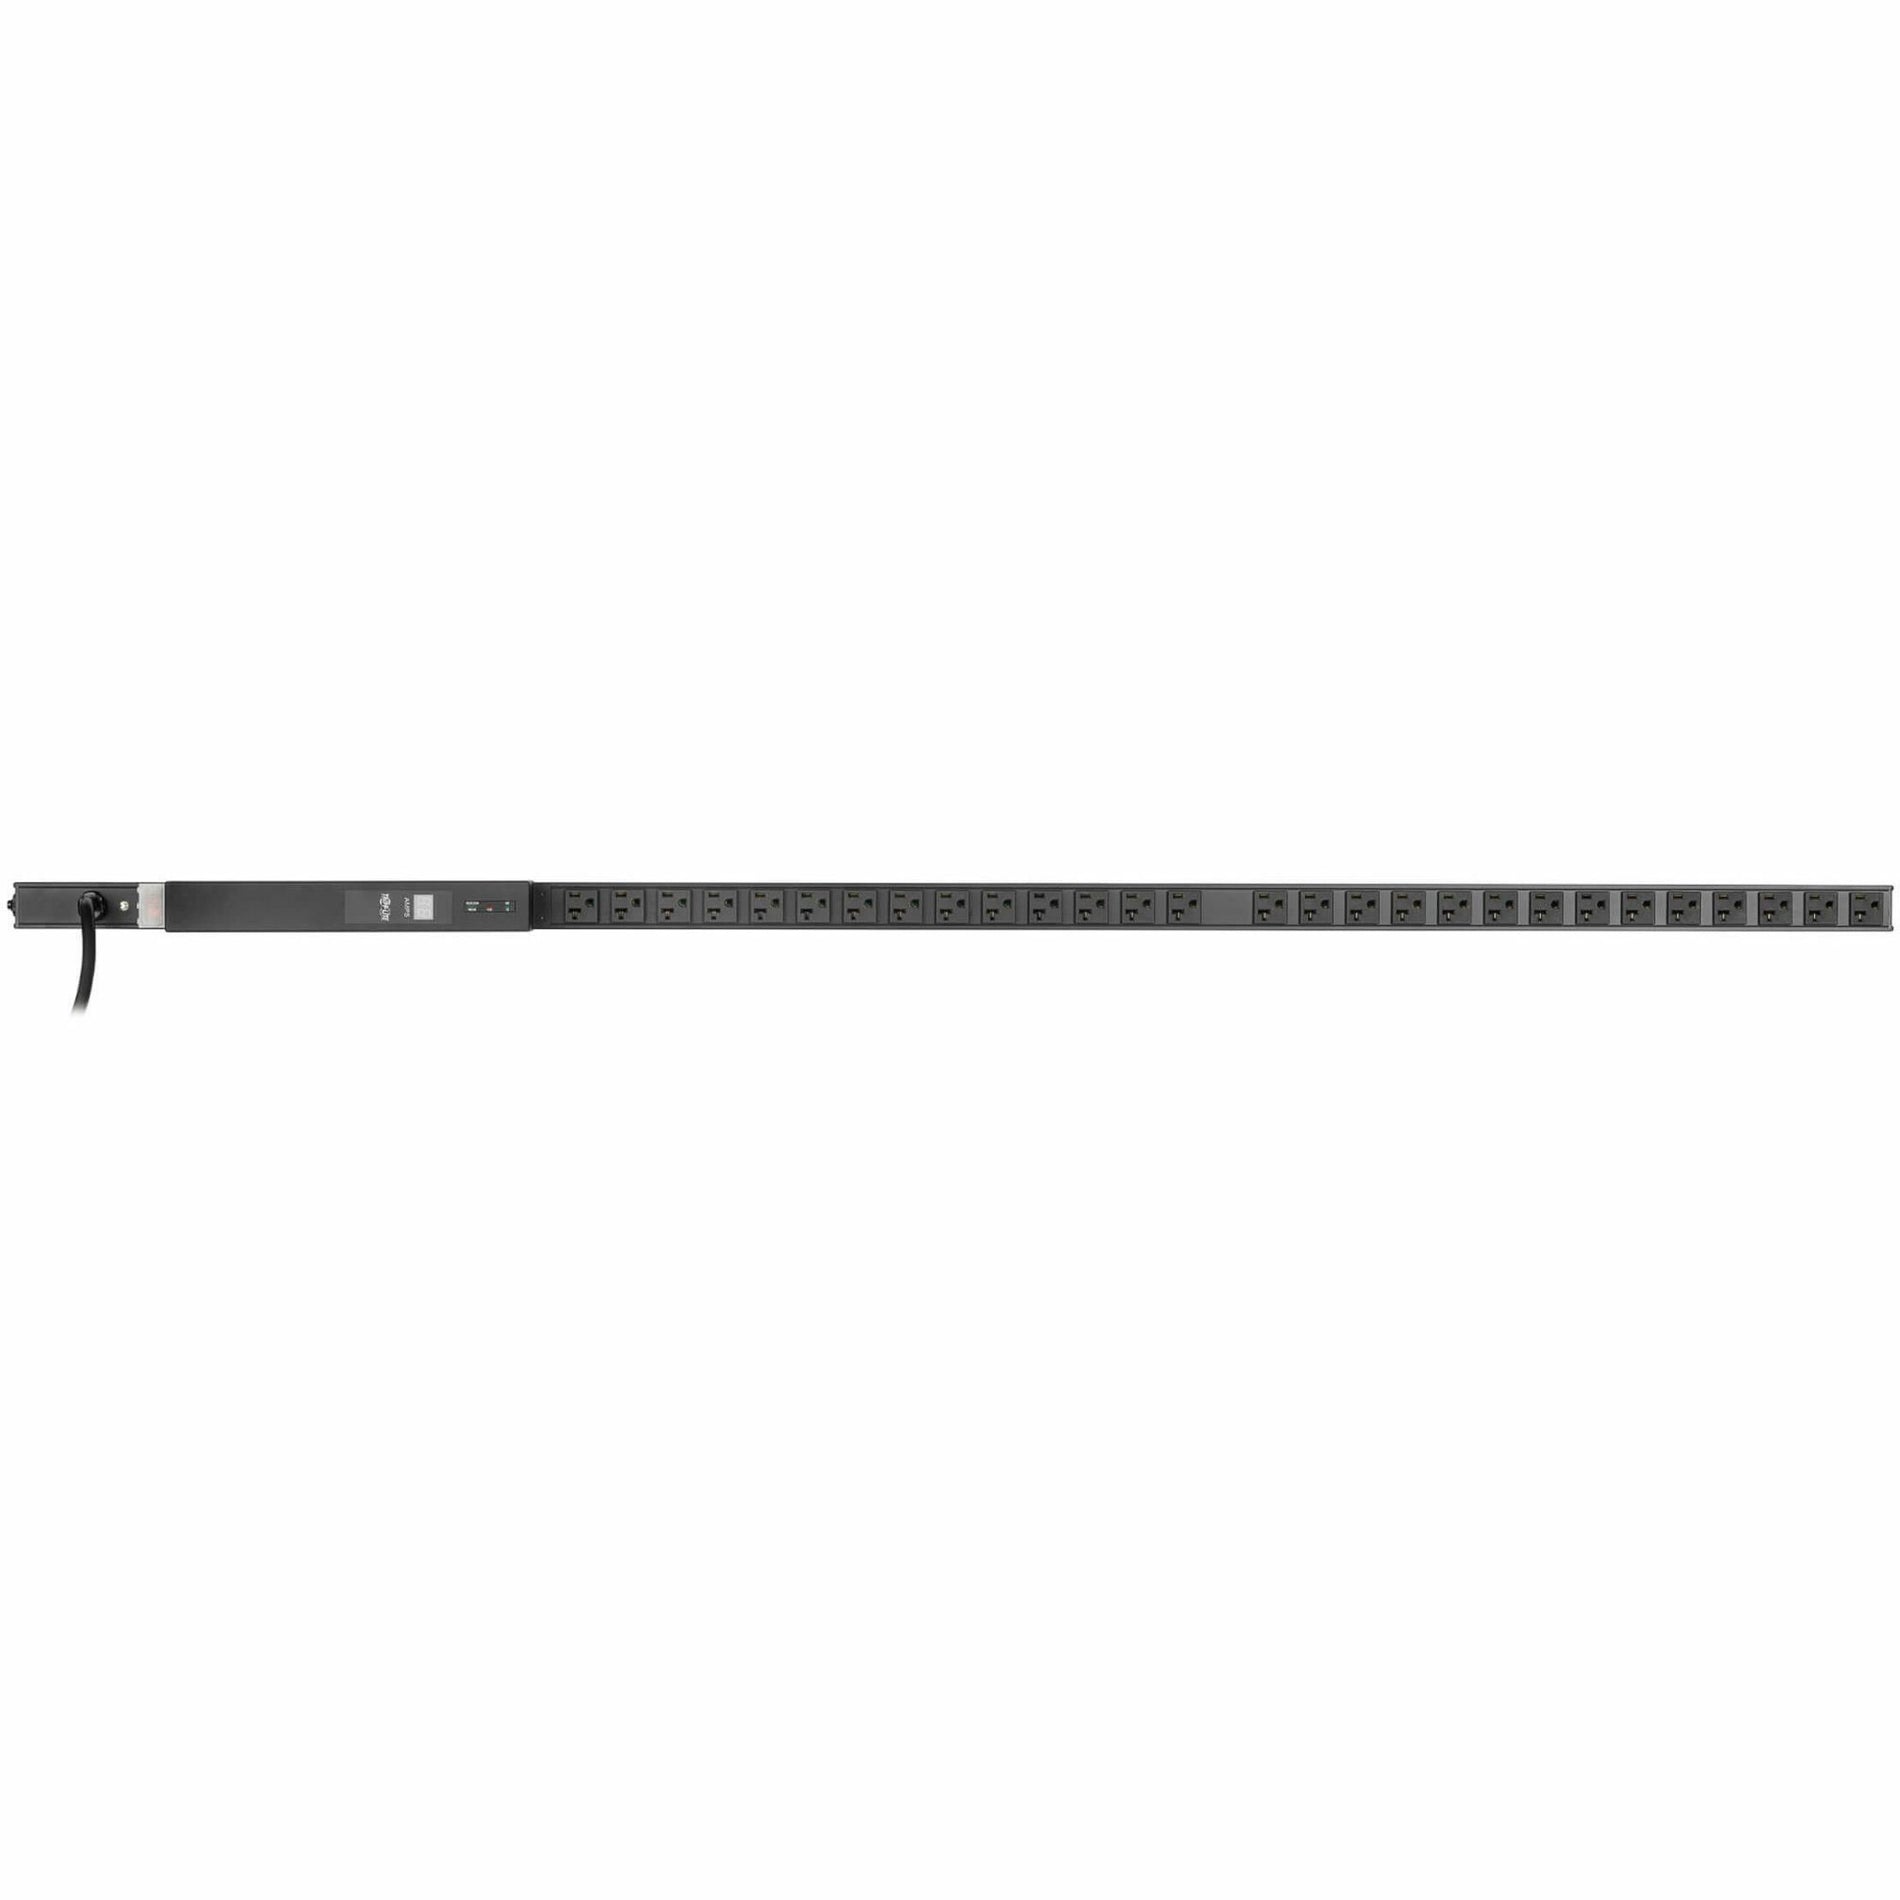 Tripp Lite PDUMV20-ISO 28-Outlets PDU, 120V AC, 1920W, Single Phase, Wall-mountable, RoHS Certified